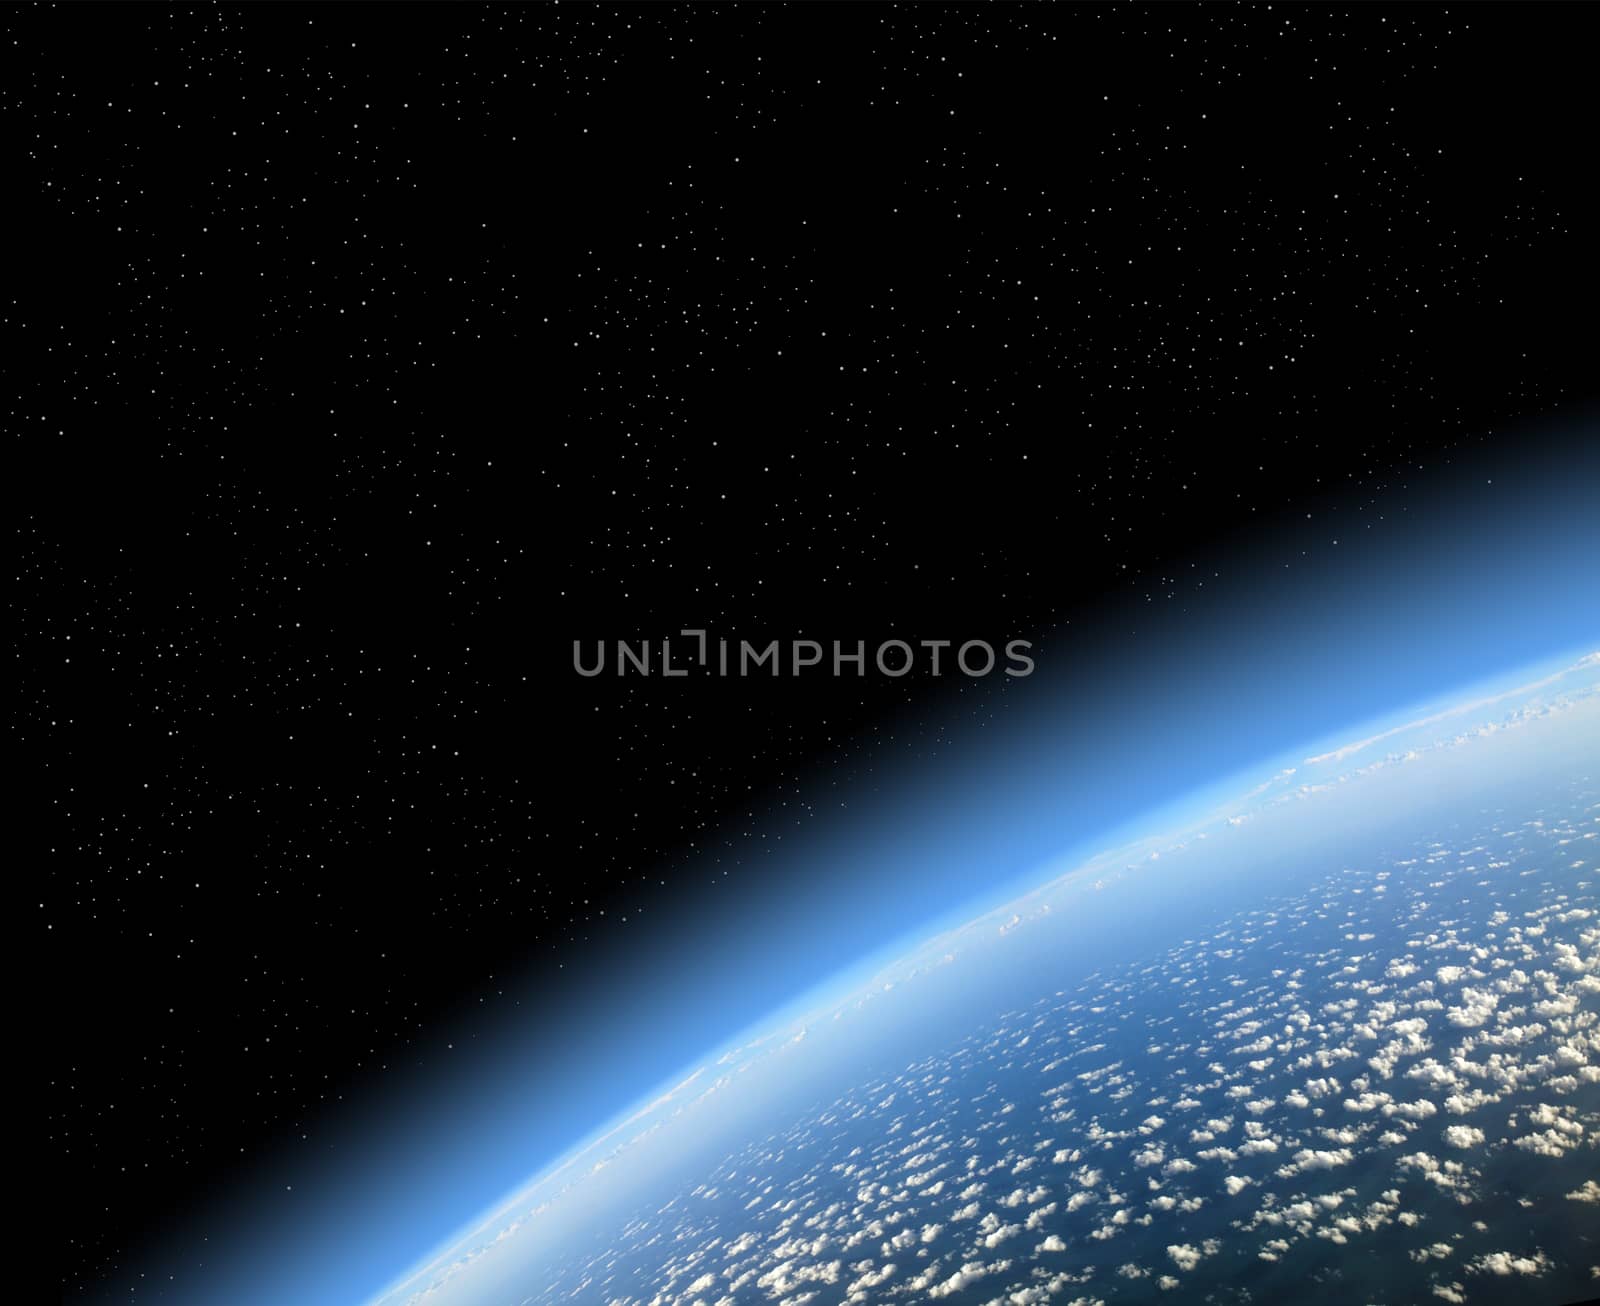 view of the Earth from space, blue planet and deep black space